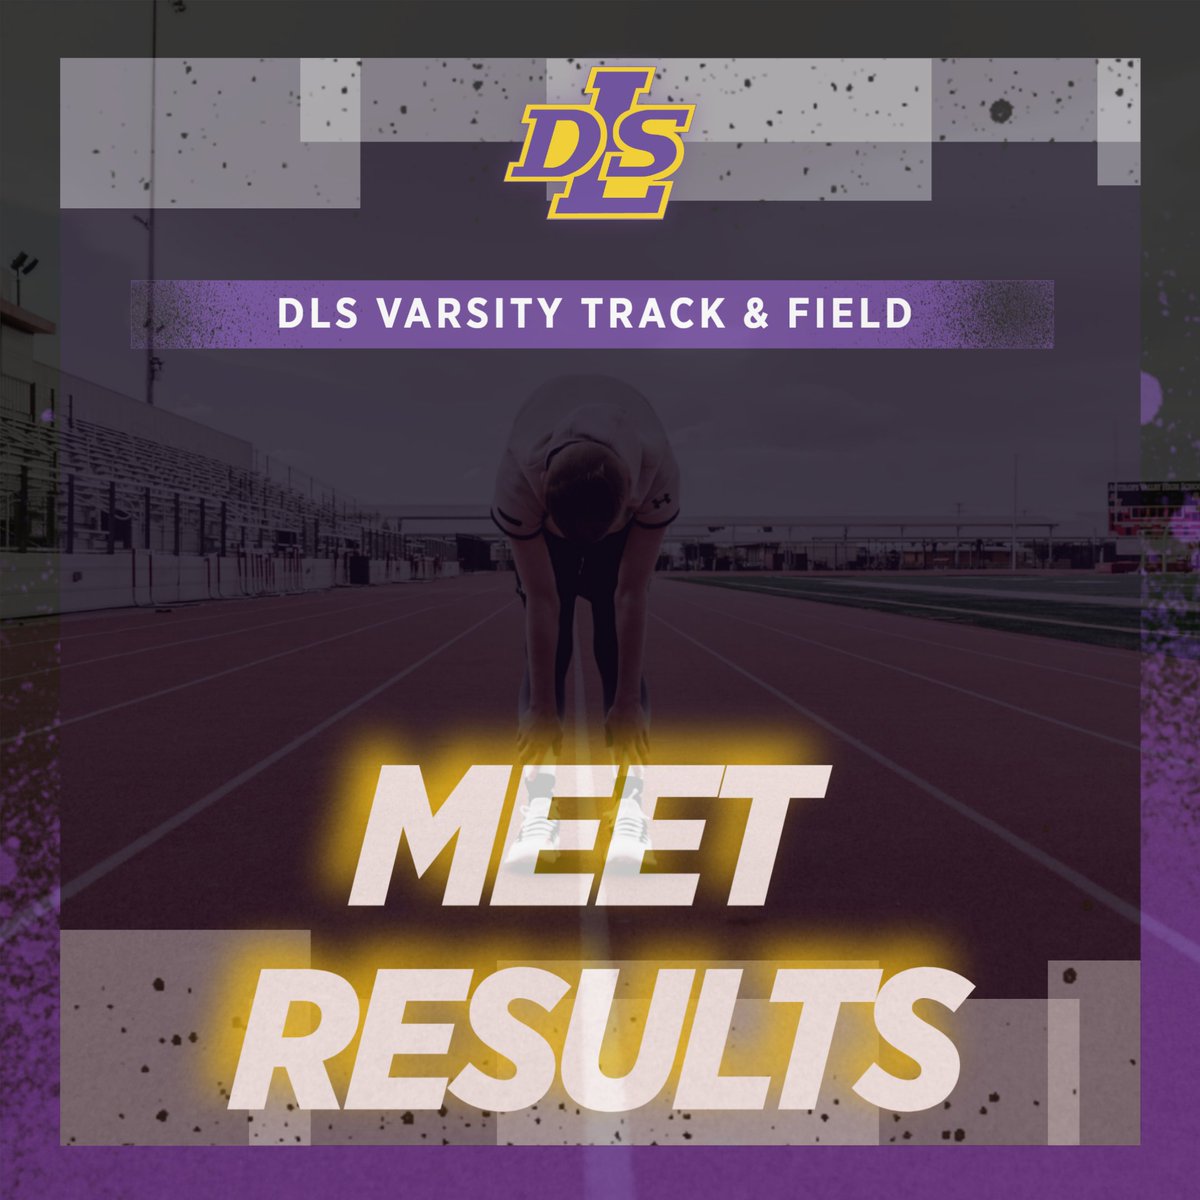 DLS Varsity Track distance runners competed in the Romeo Barnyard Distance Invitational yesterday. PRs were set by 8 of 9 competitors and everyone ran their best times of the season. #PilotPride Next up: Oxford Invite today, April 27.